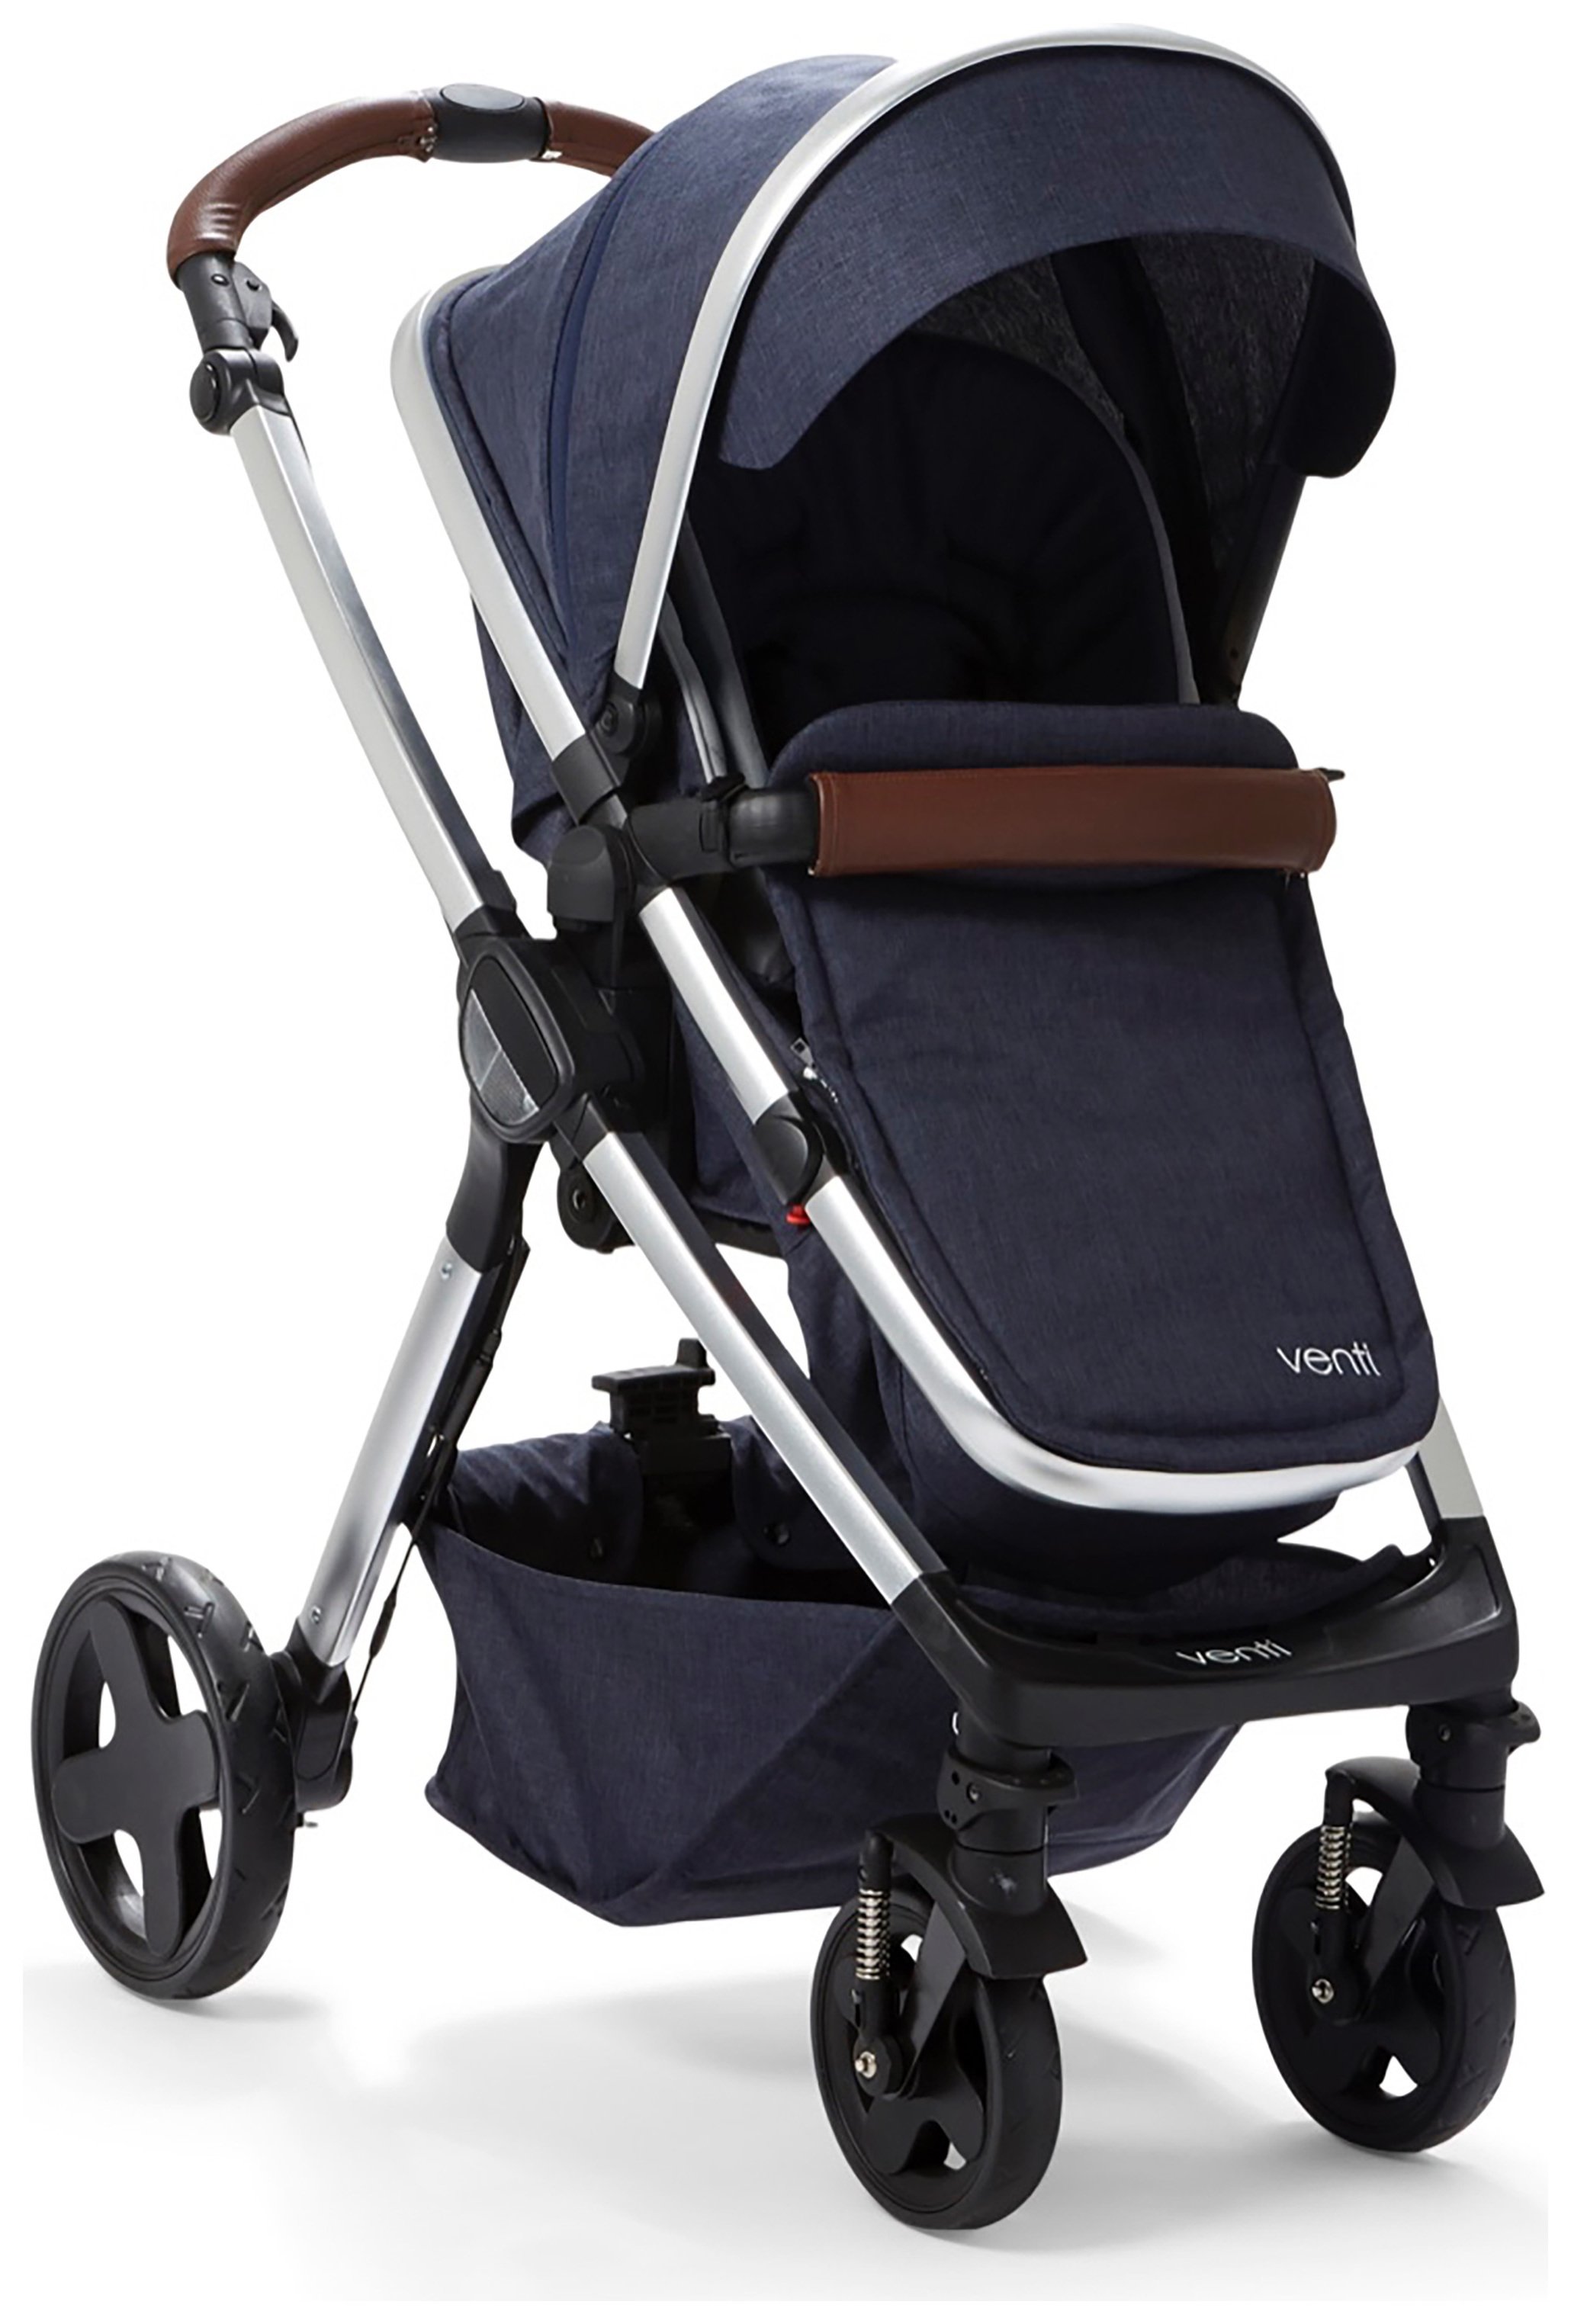 Venti 2 in 1 Pushchair Review